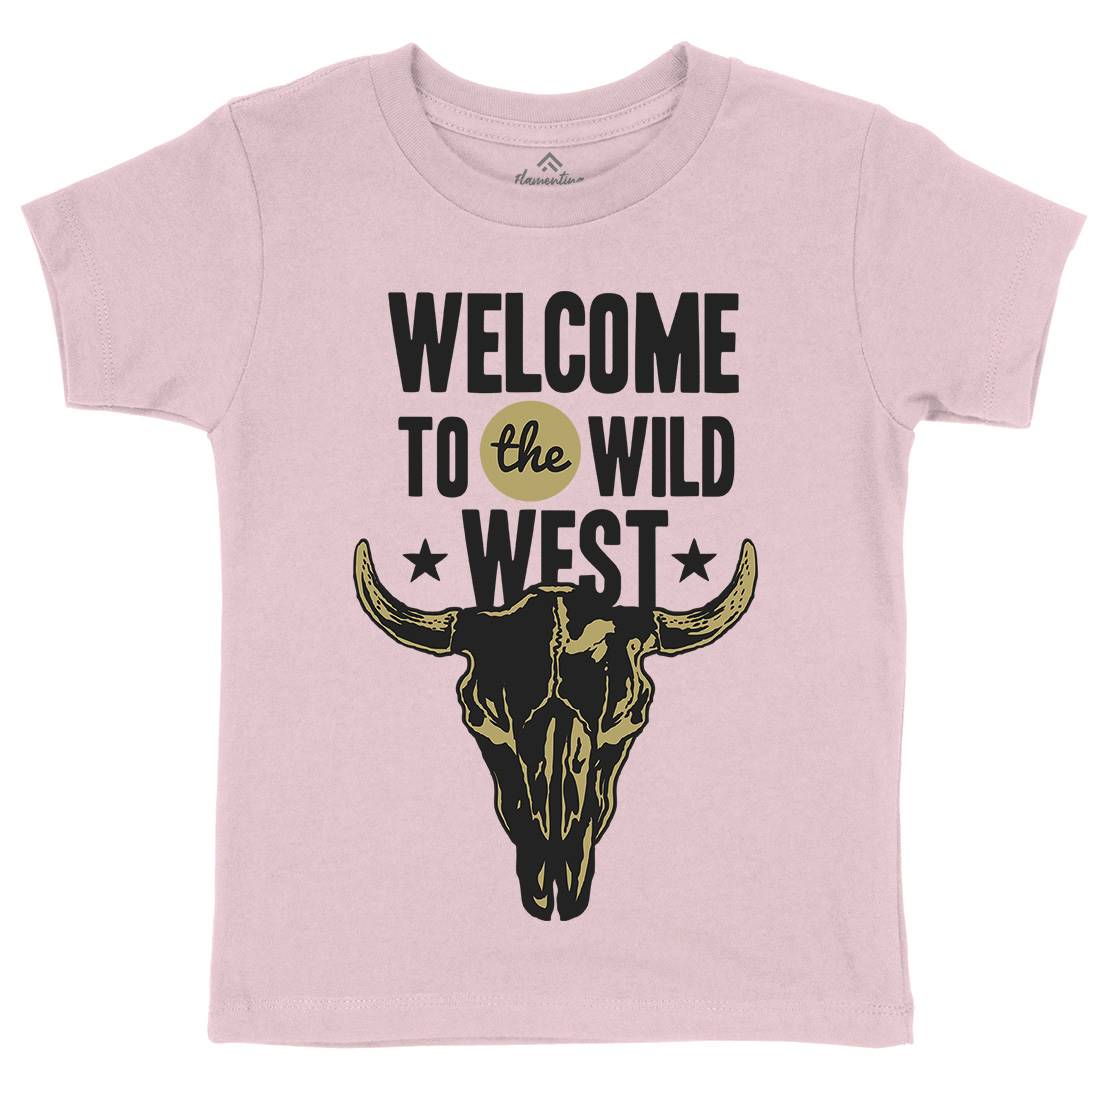 Welcome To The Wild West Kids Crew Neck T-Shirt American A393